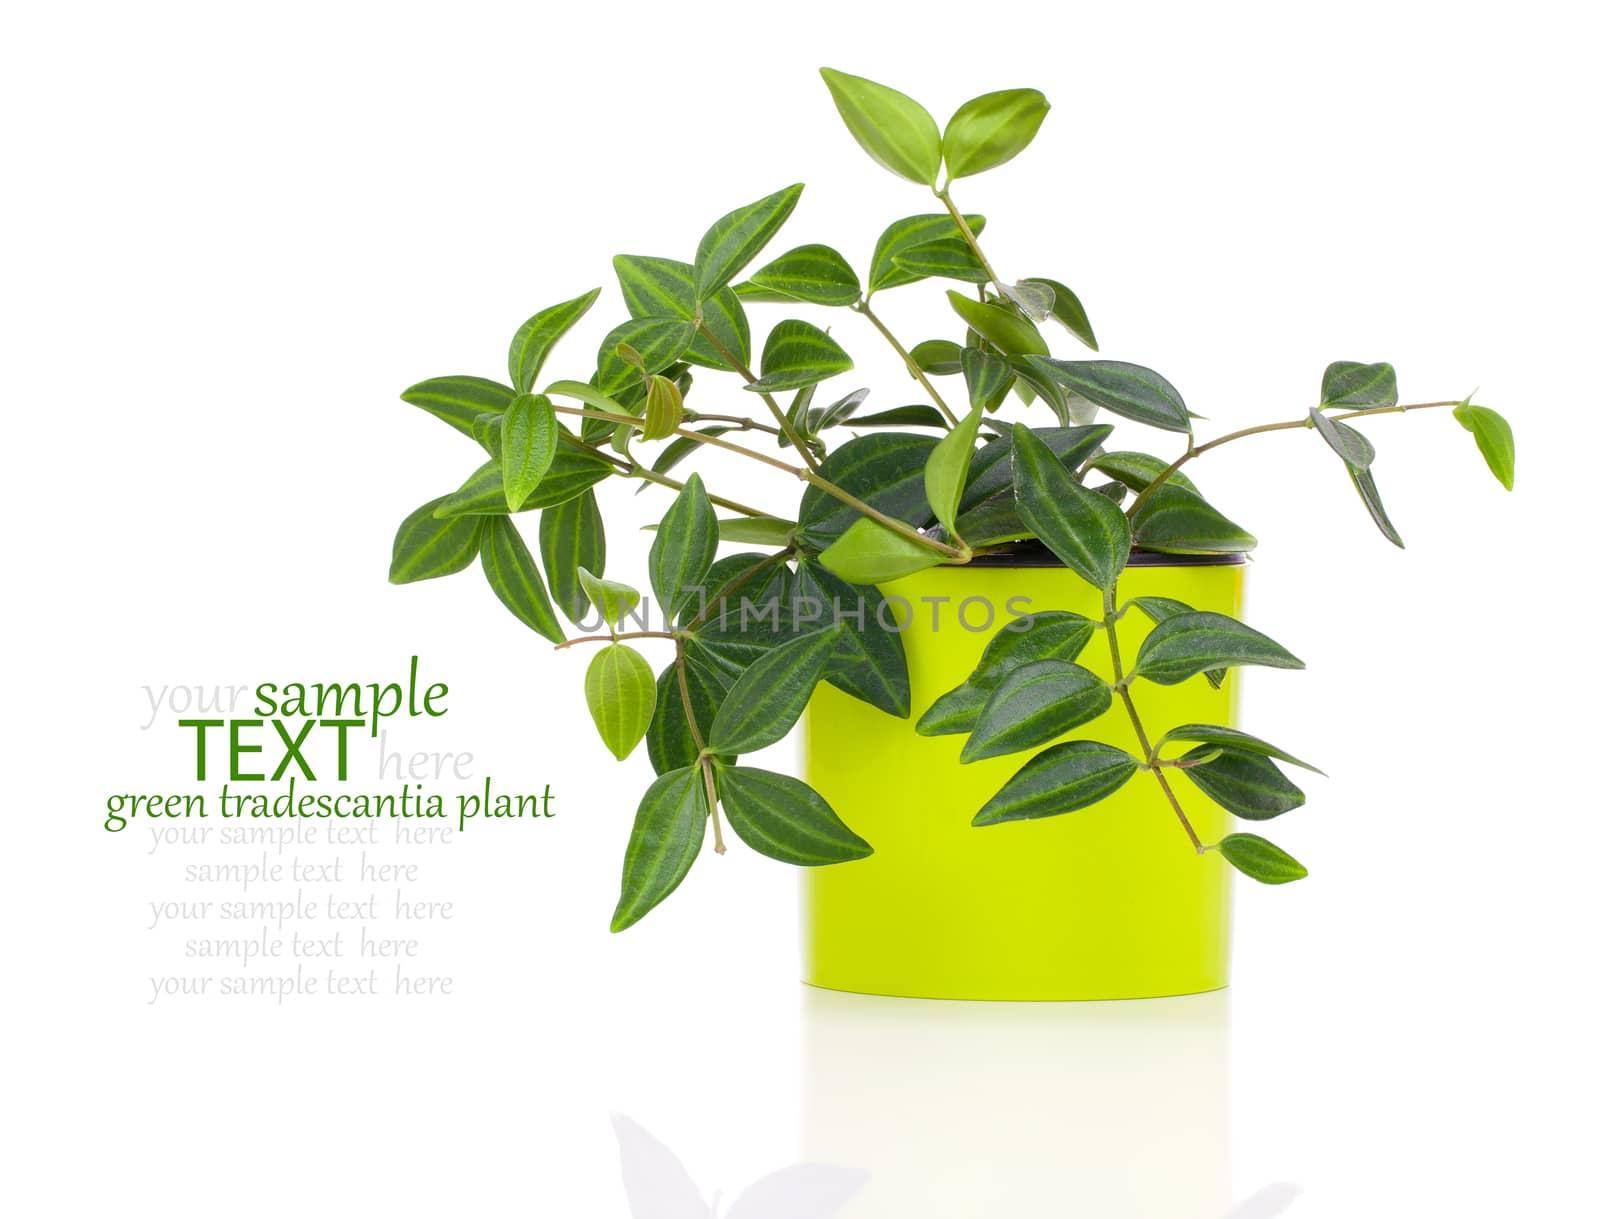 green tradescantia plant in pot, isolated on white background by motorolka